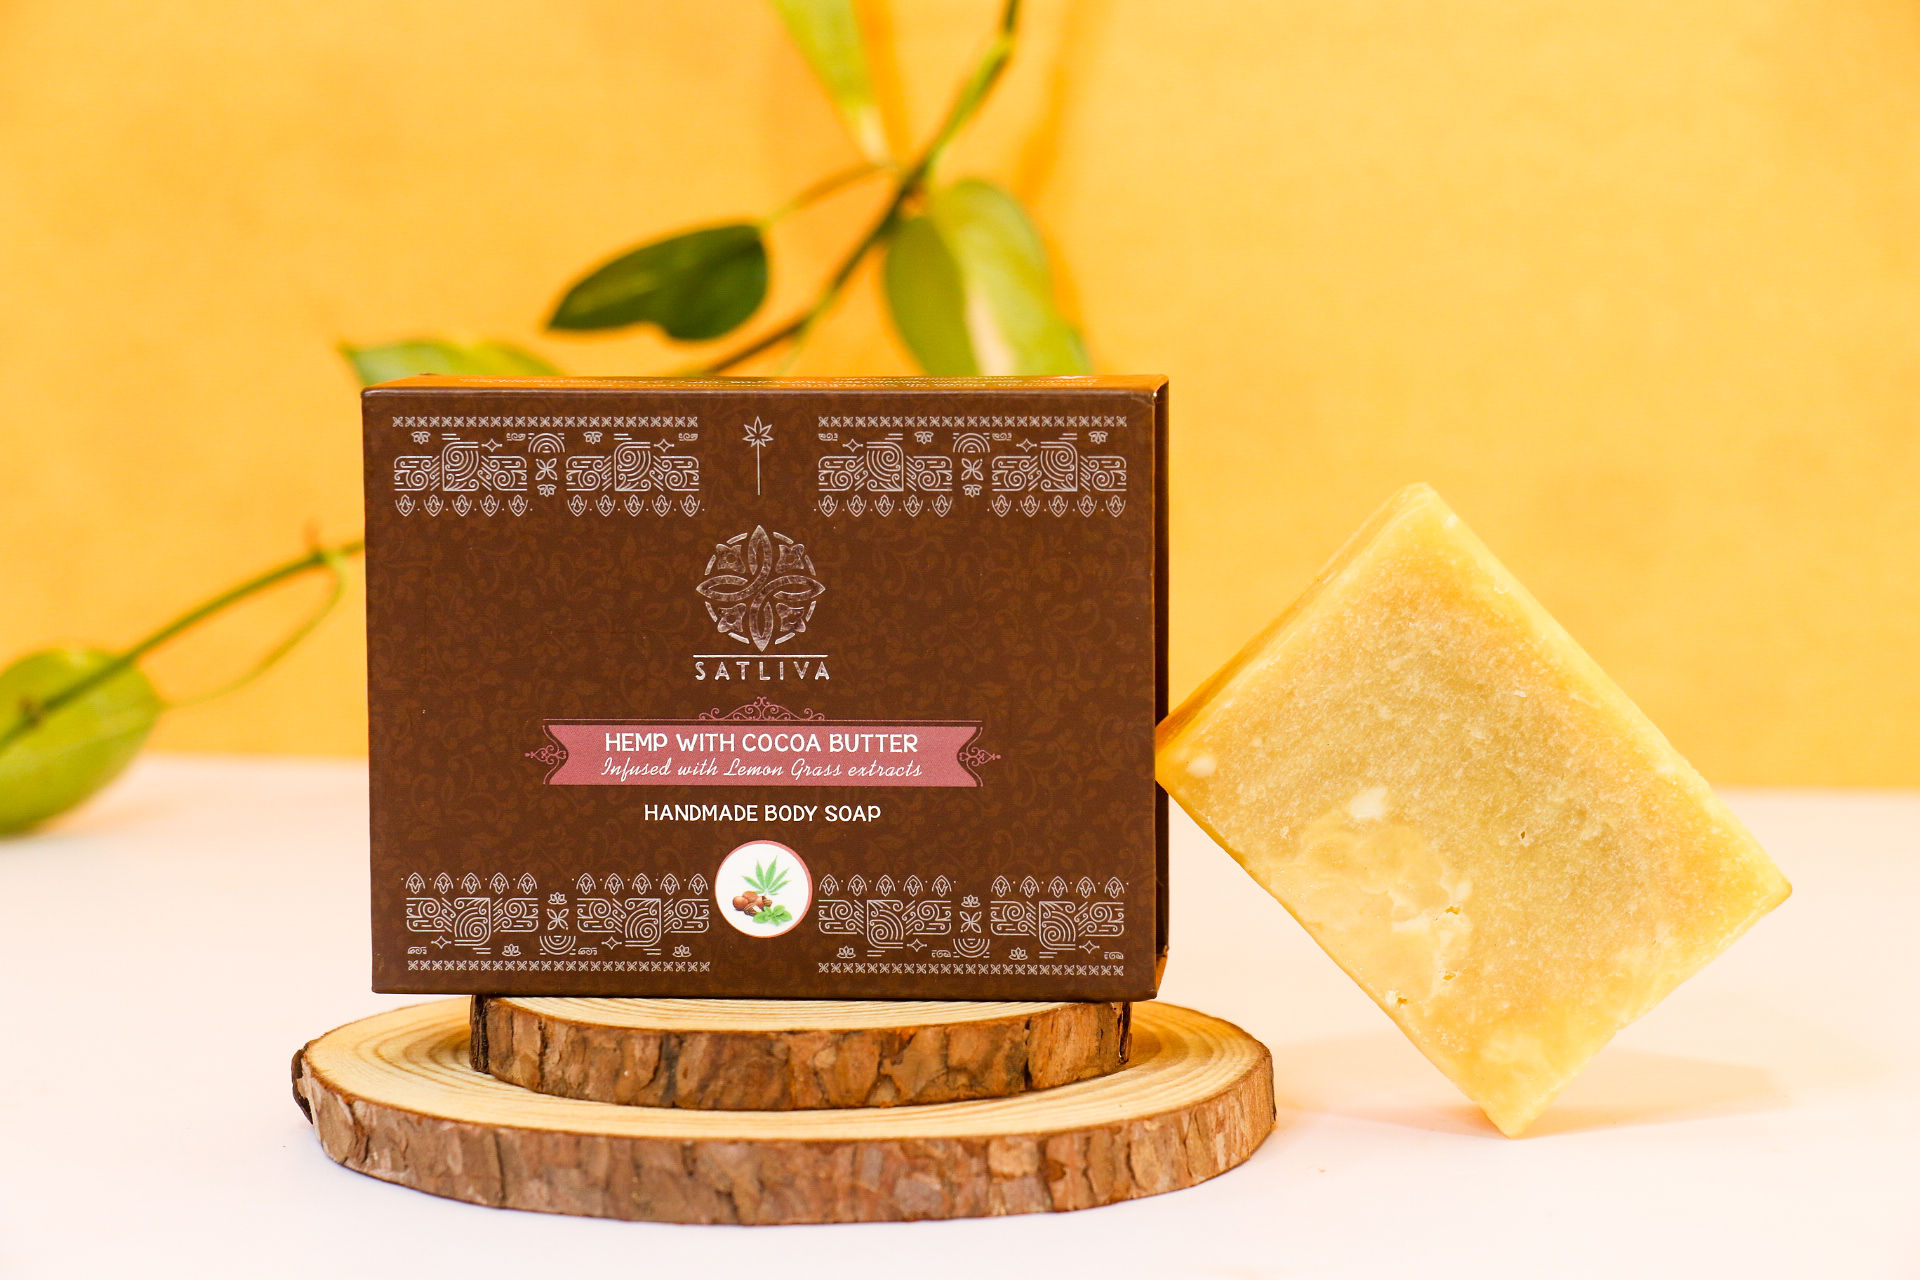 Hemp with cocoa butter soap